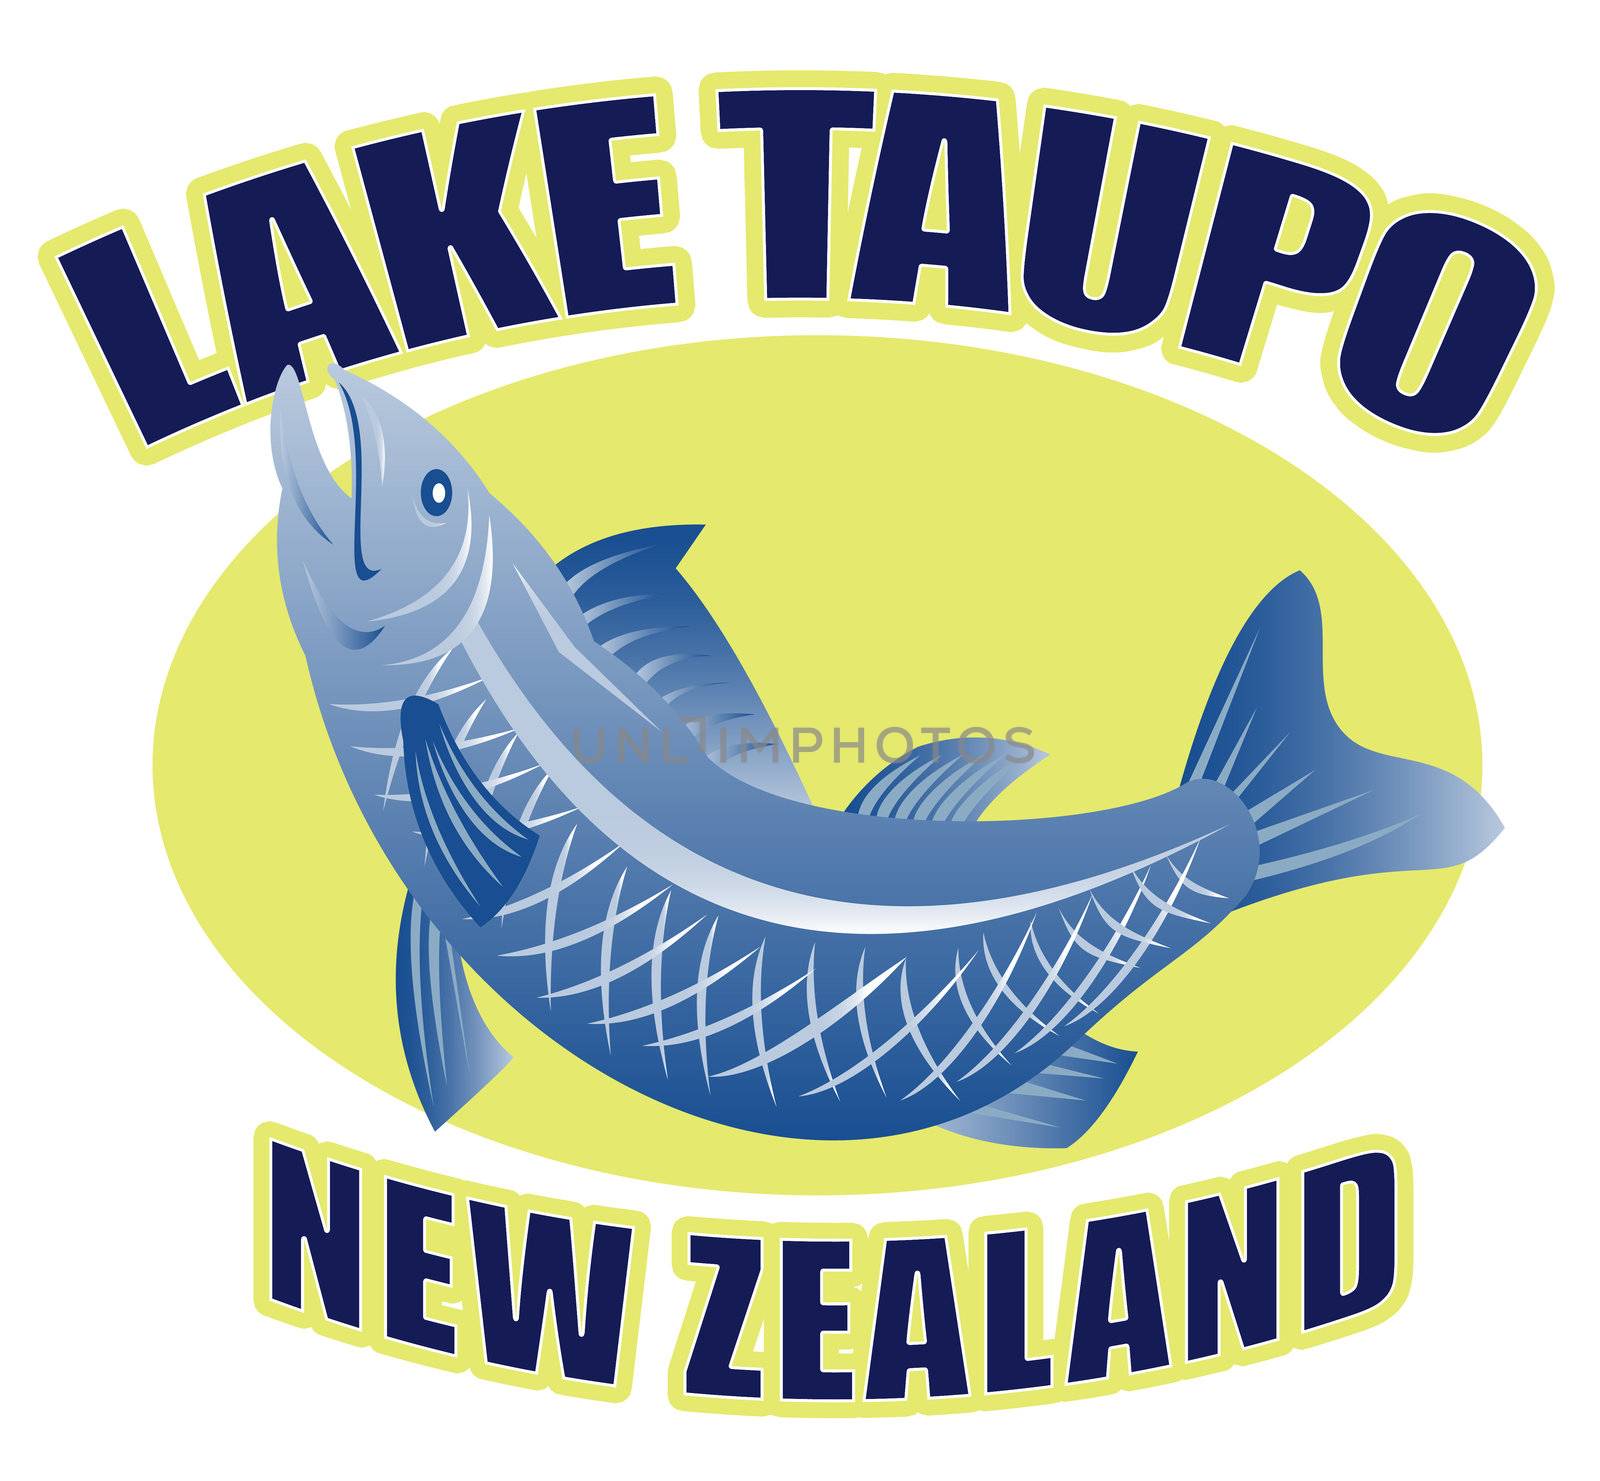 retro style illustration of a Trout fish jumping side view with words "lake taupo new zealand"